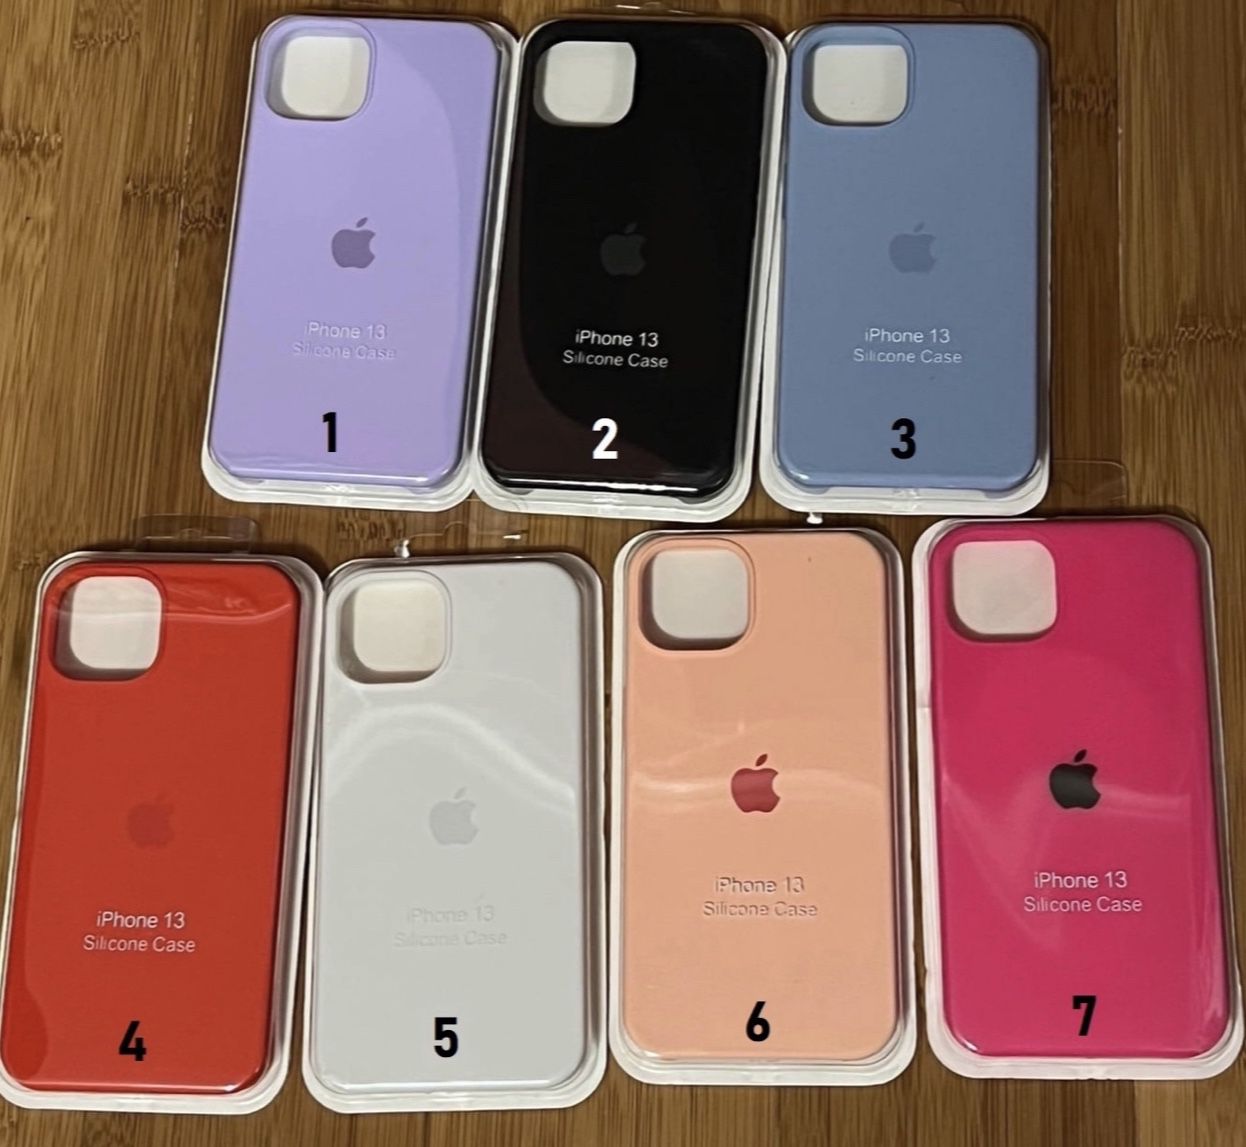 Apple Iphone case for Iphone 11 / 12 / 13 / Pro / Max (Silicone cases)